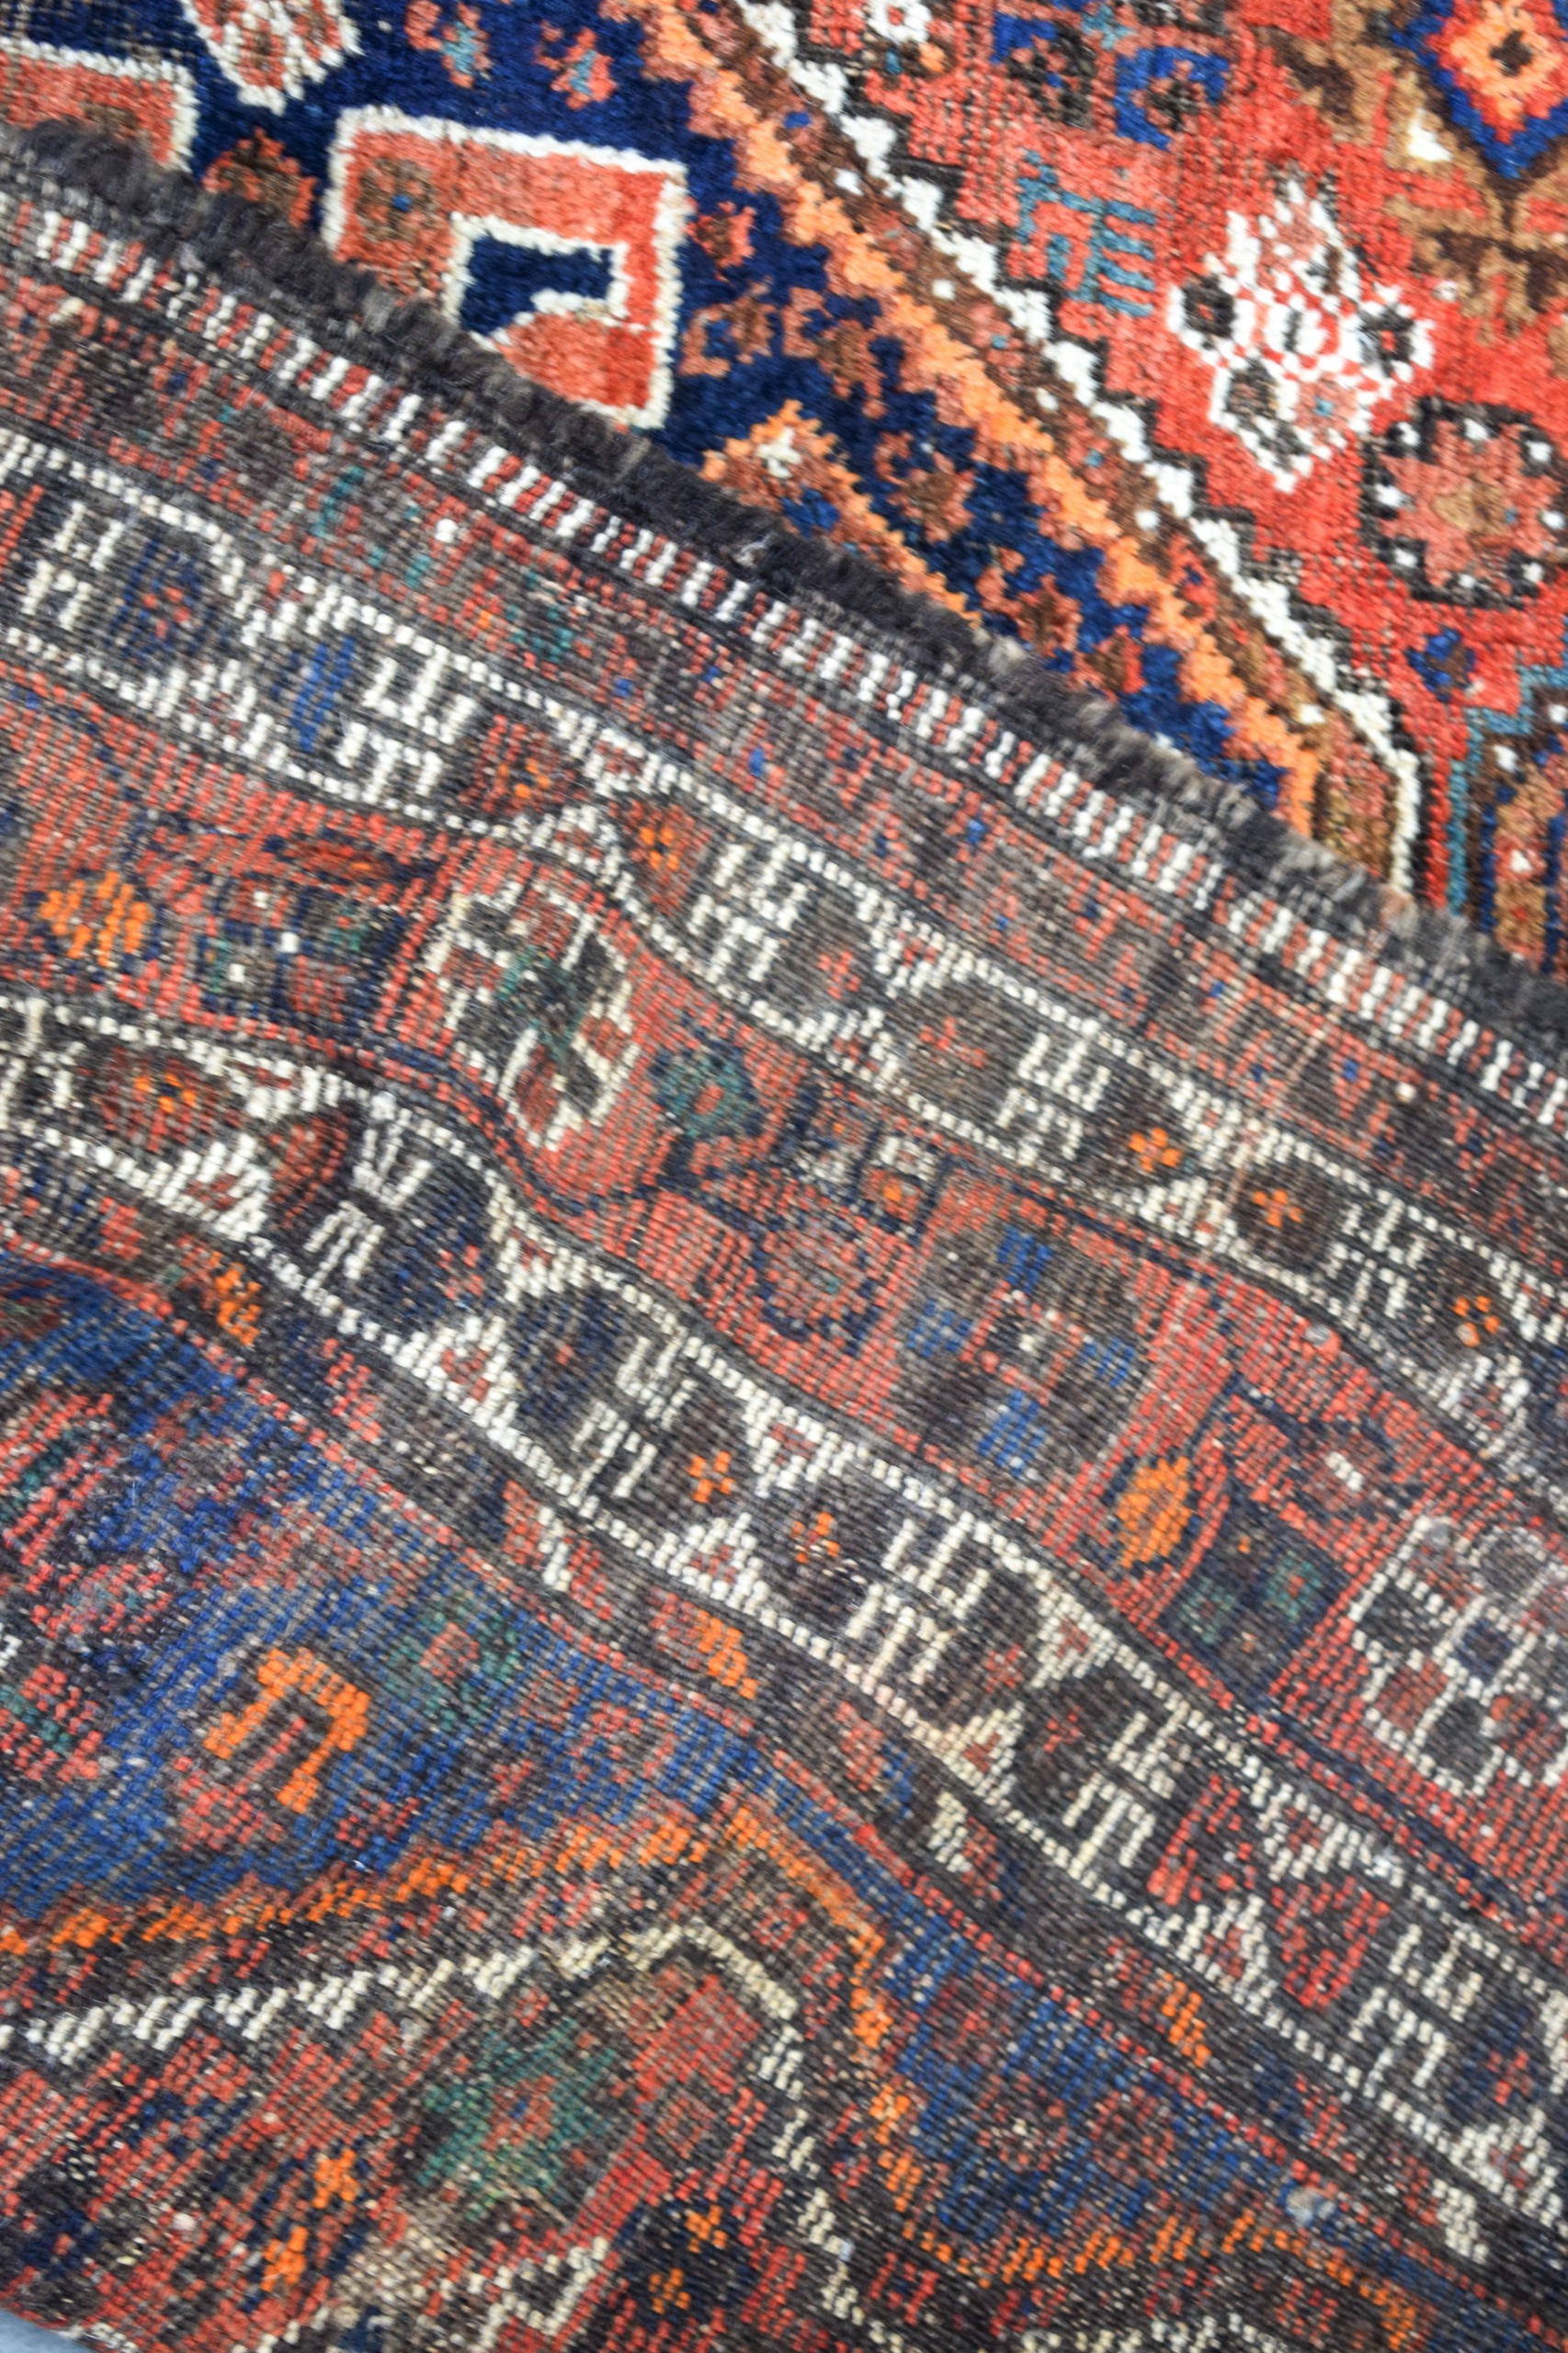 A BLUE GROUND PERSIAN RUG, decorated with symbols and motifs. 247 cm x 169 cm. - Image 4 of 4